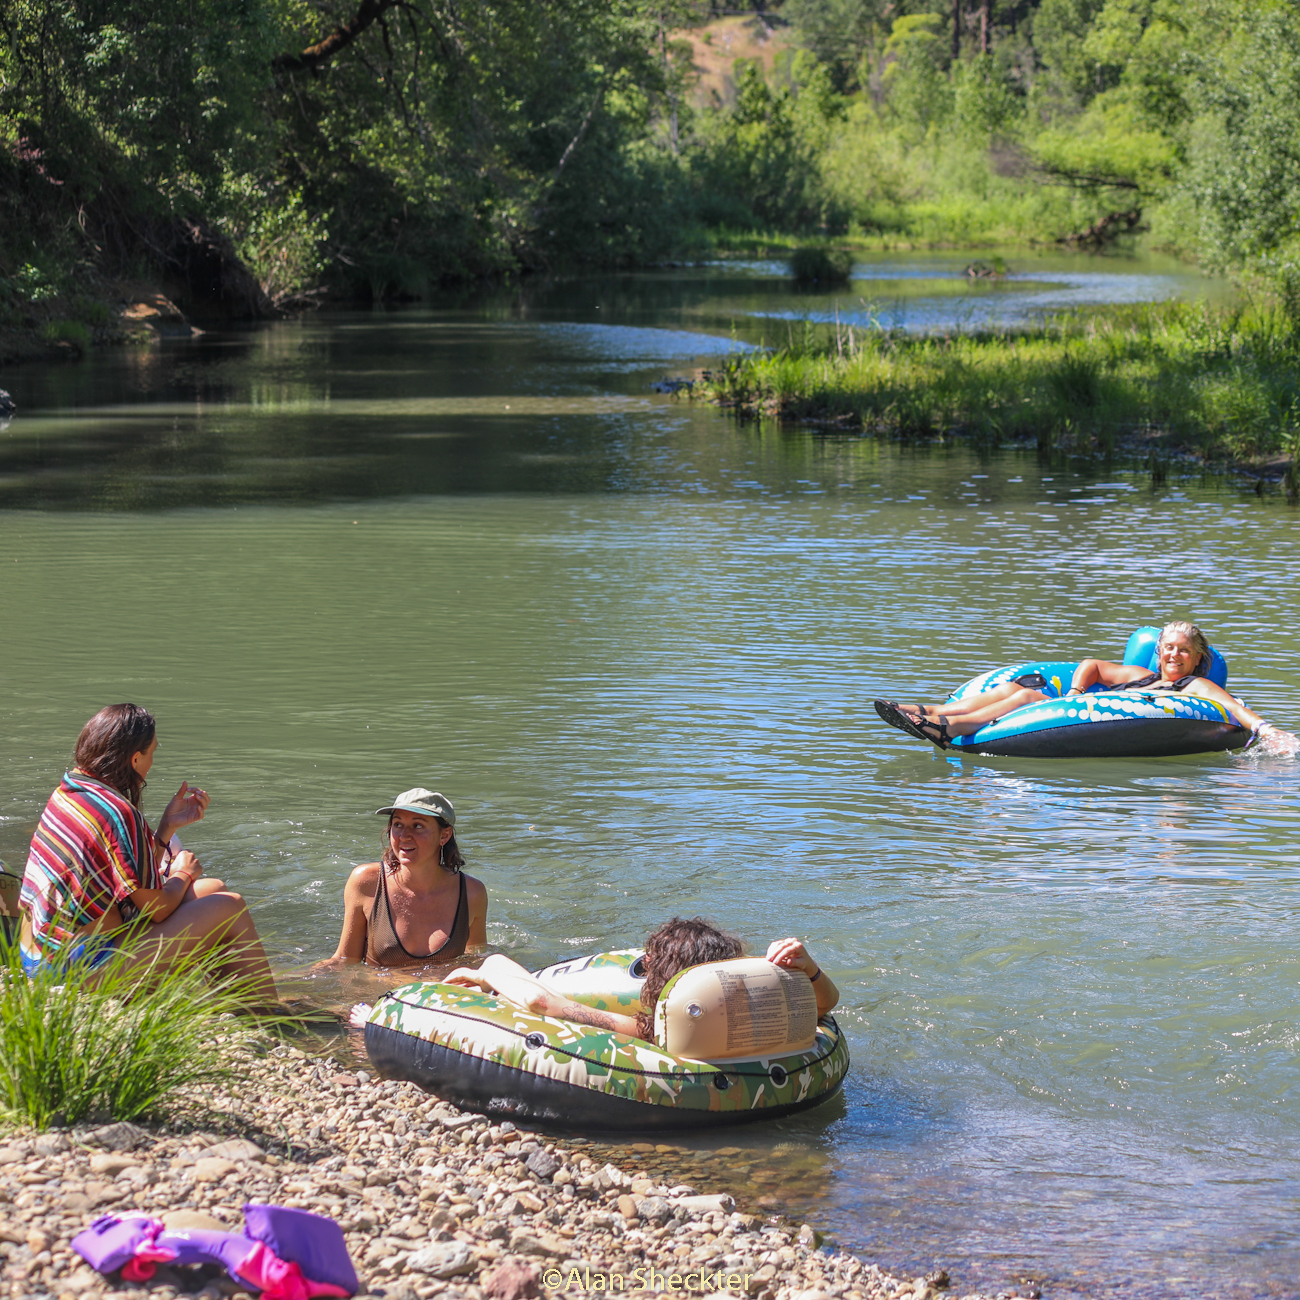 Ten Mile Creek offered addition recreation